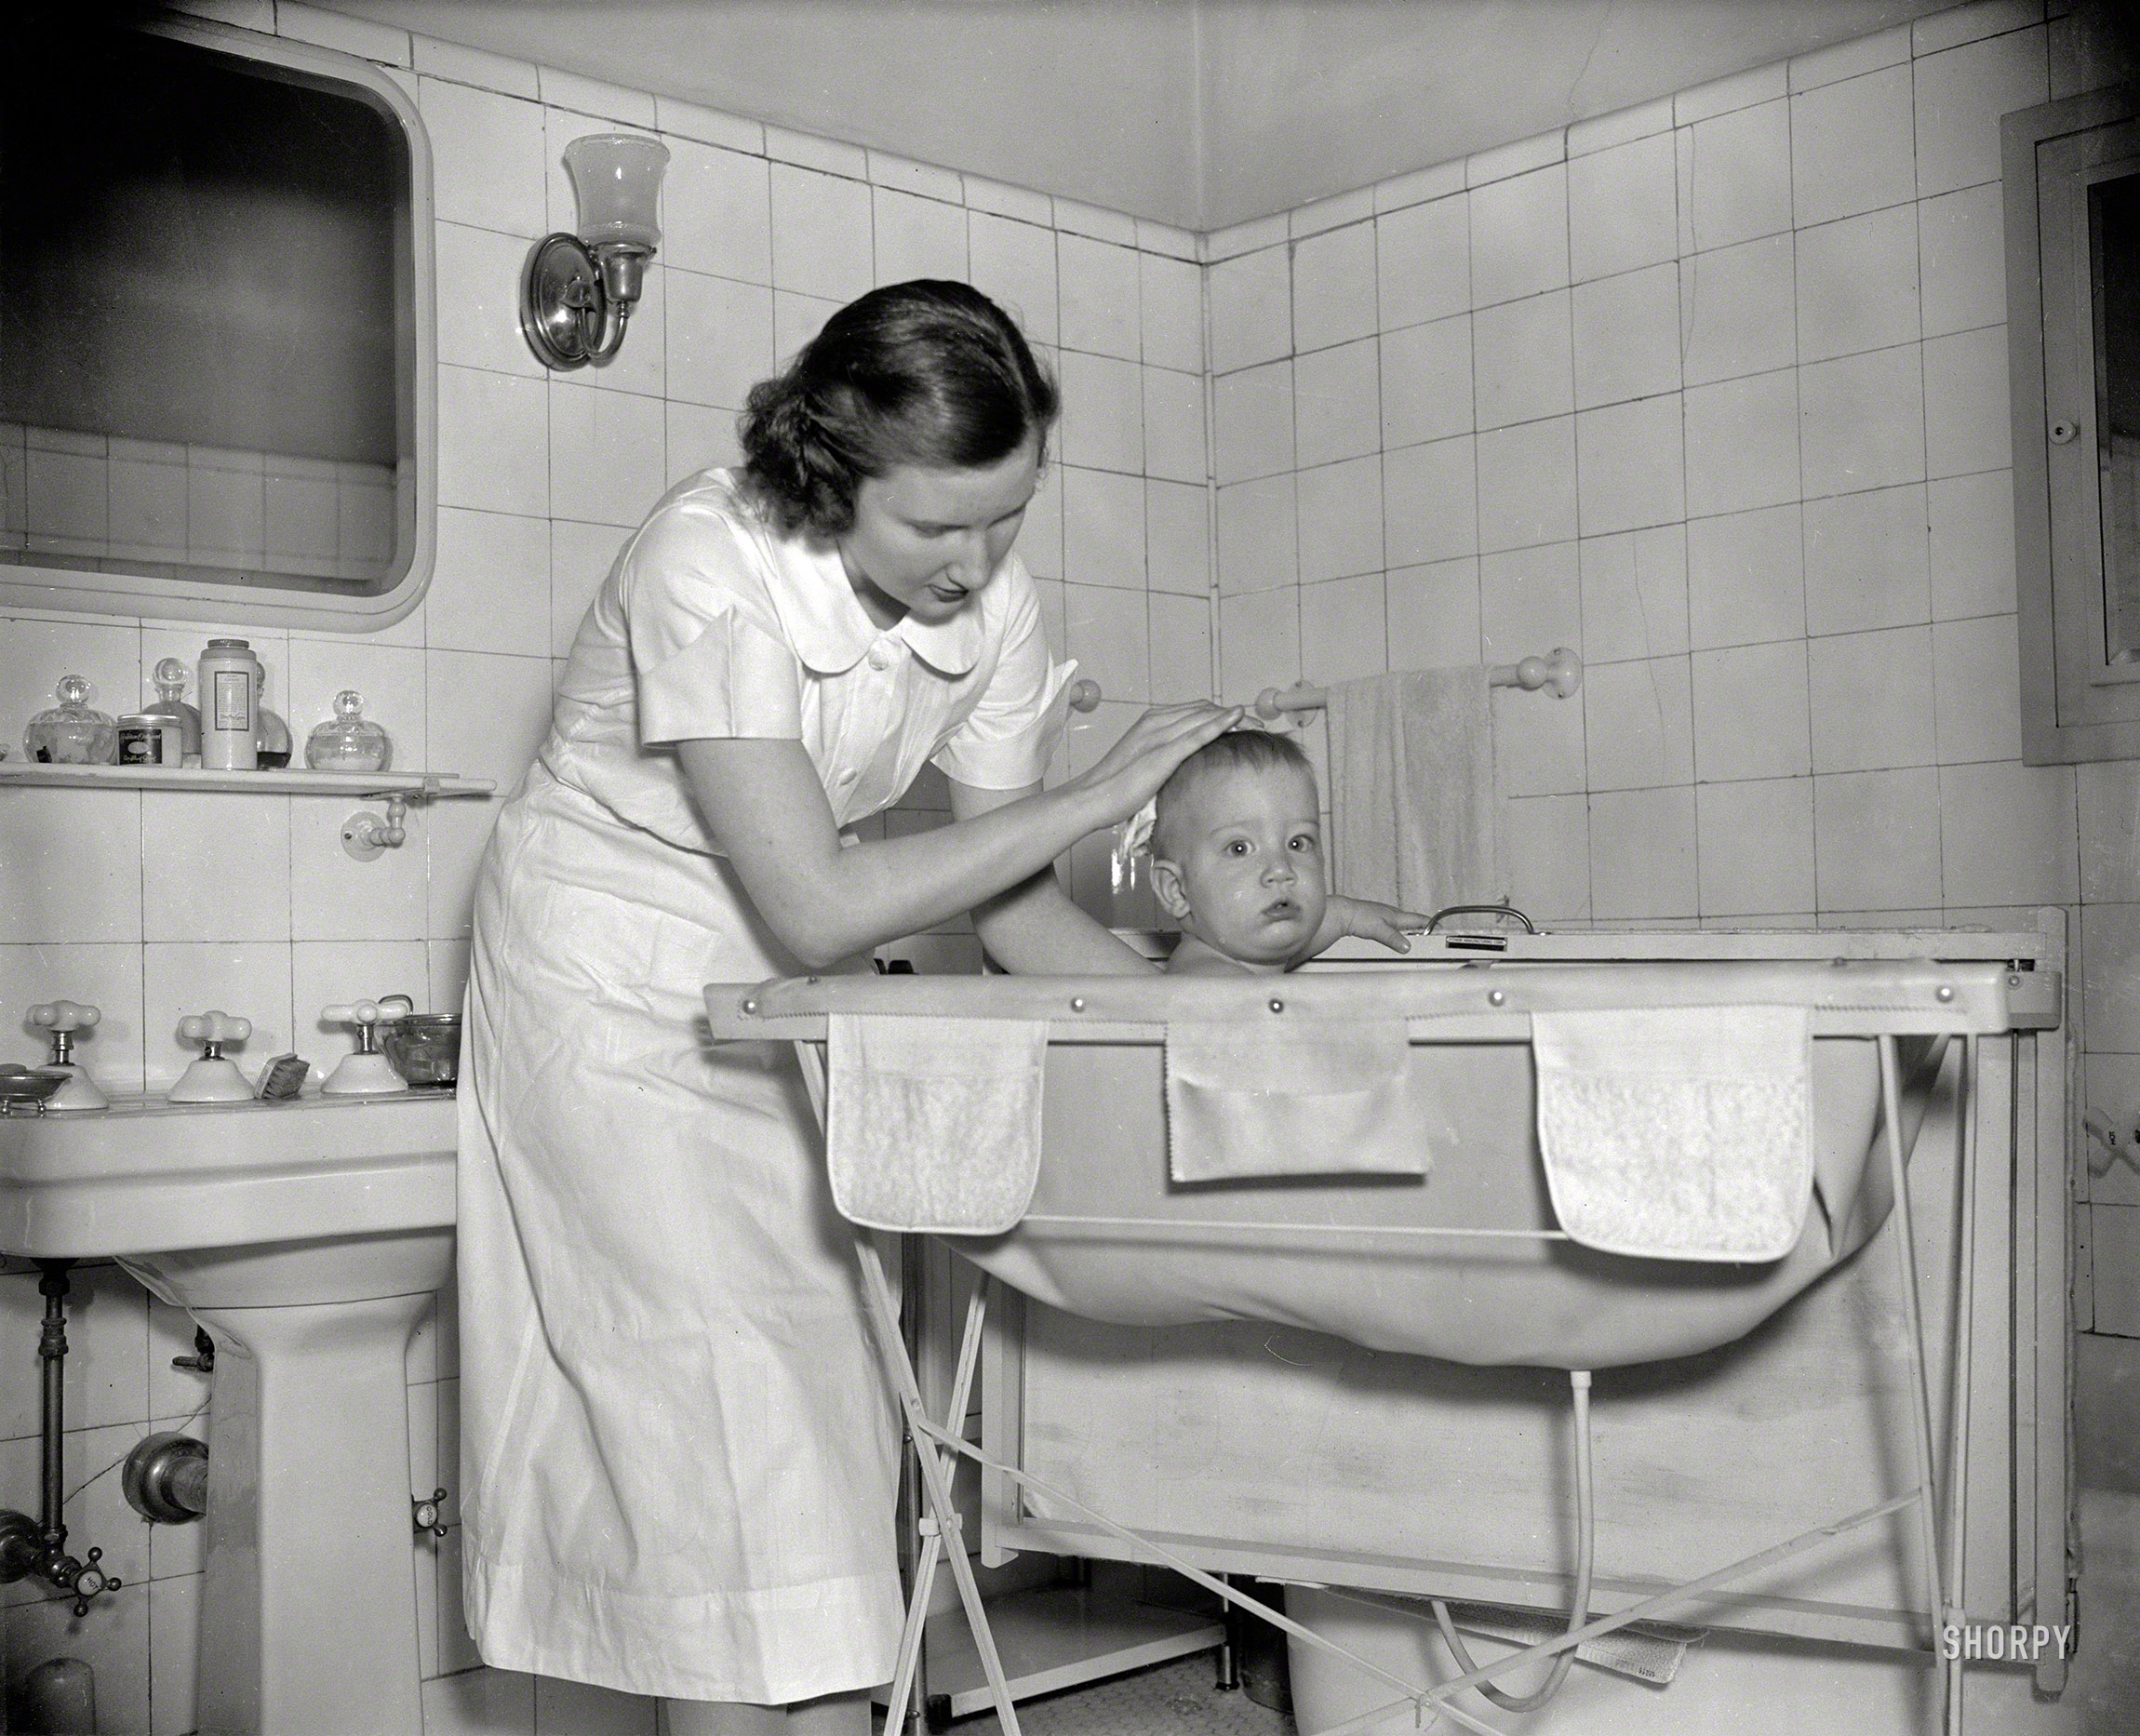 Washington, D.C., 1937. "Baby's bath" is all it says here. If you recognize yourself 78 years later, let us know. Harris & Ewing glass negative. View full size.